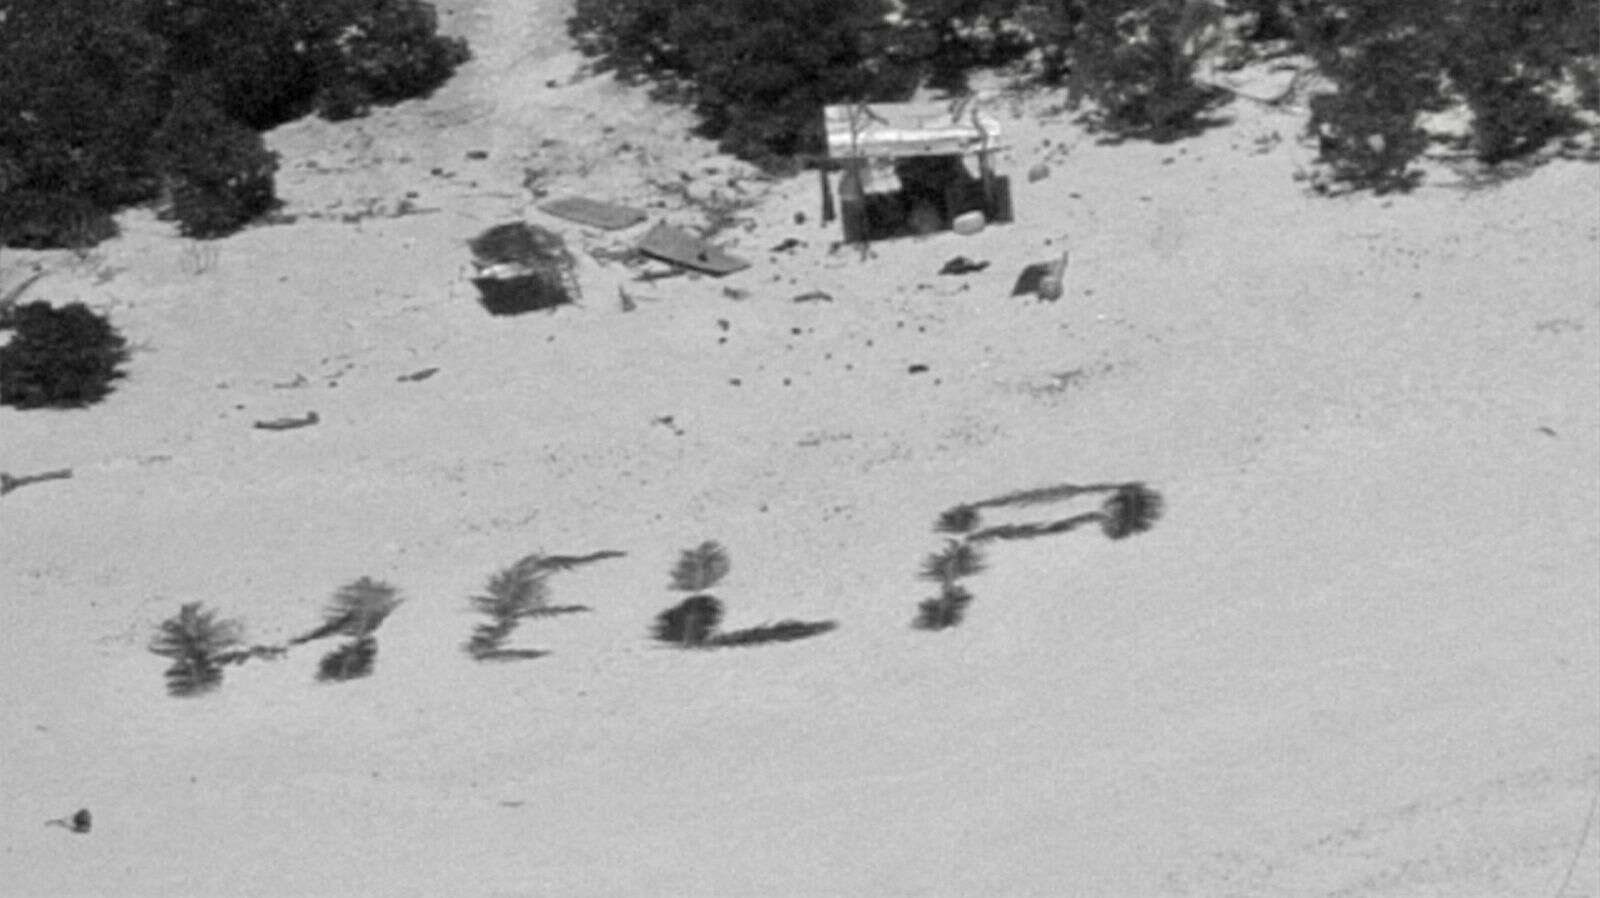 missing men write 'help' with palm fronds, rescued by us rescuers